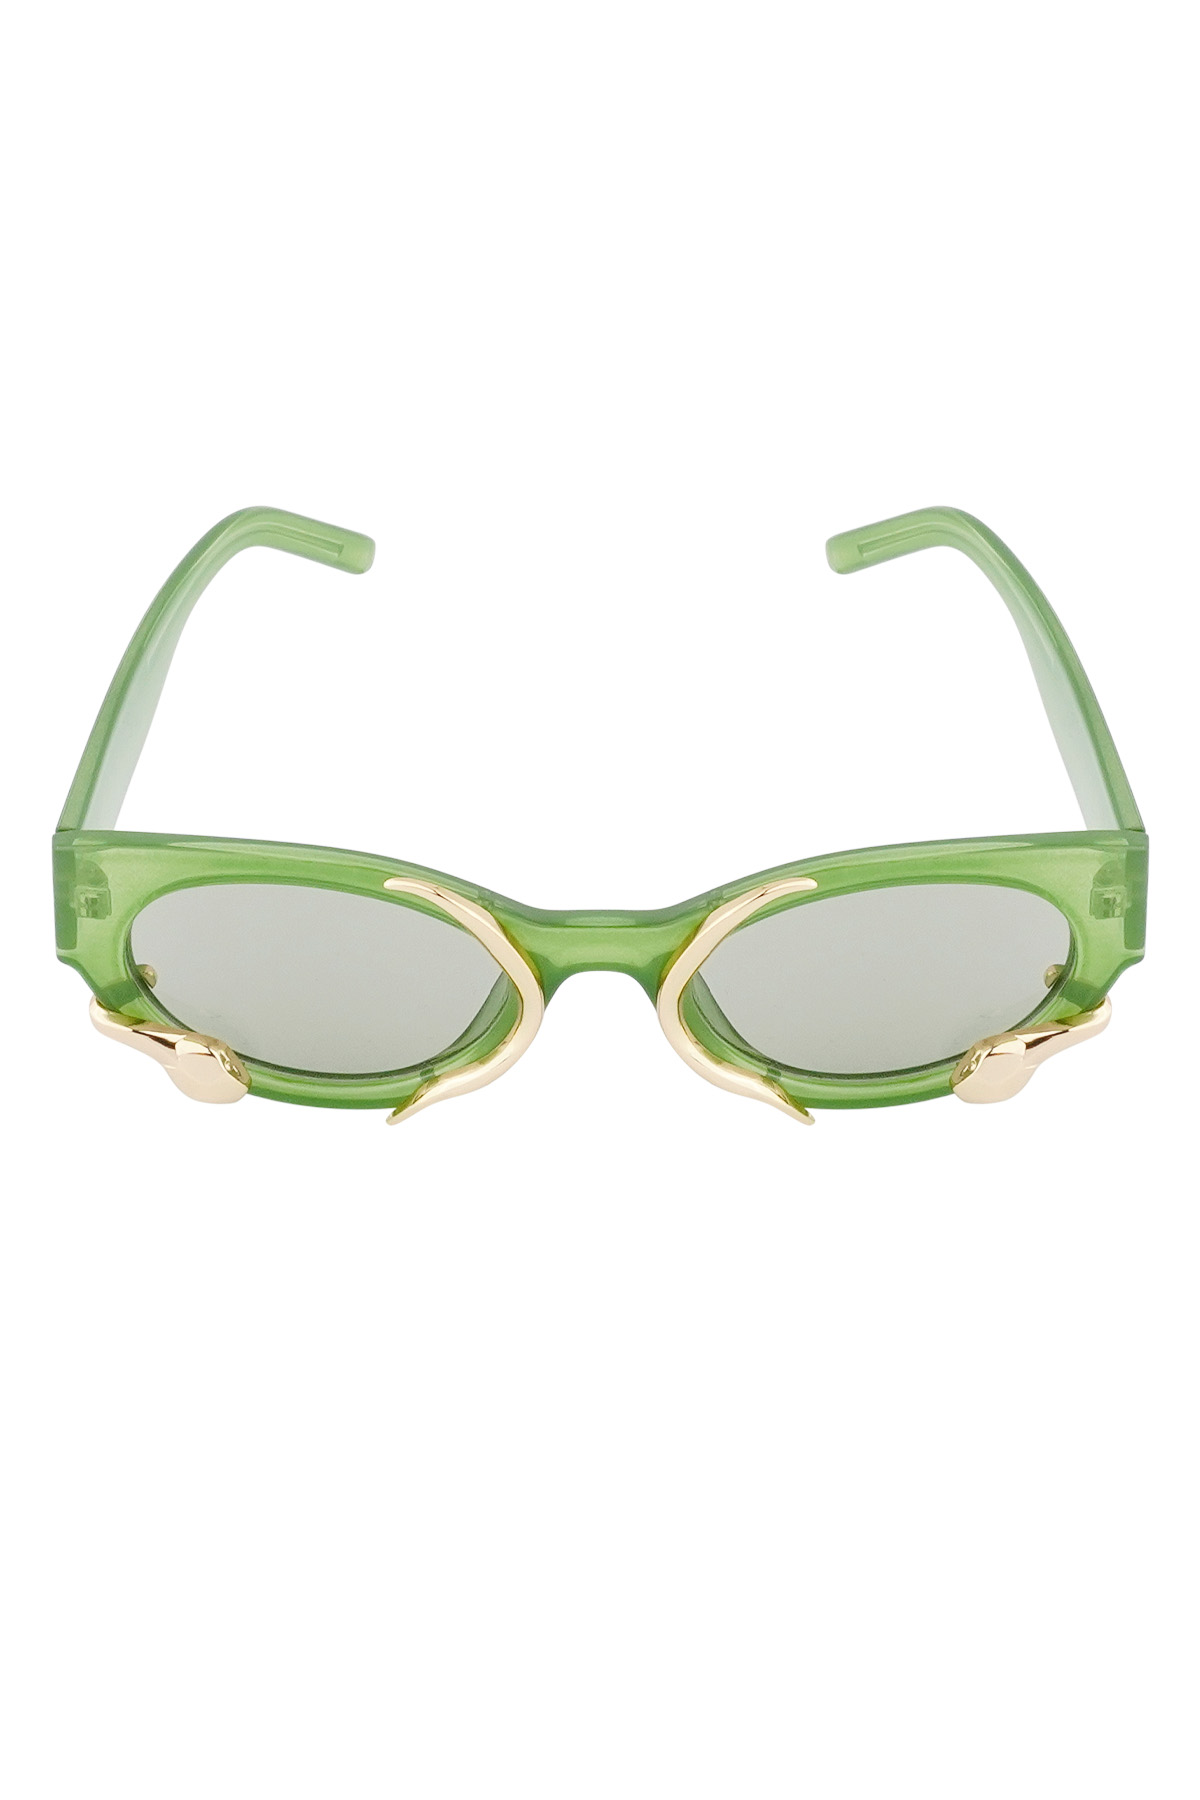 Snake sunglasses - green  h5 Picture5